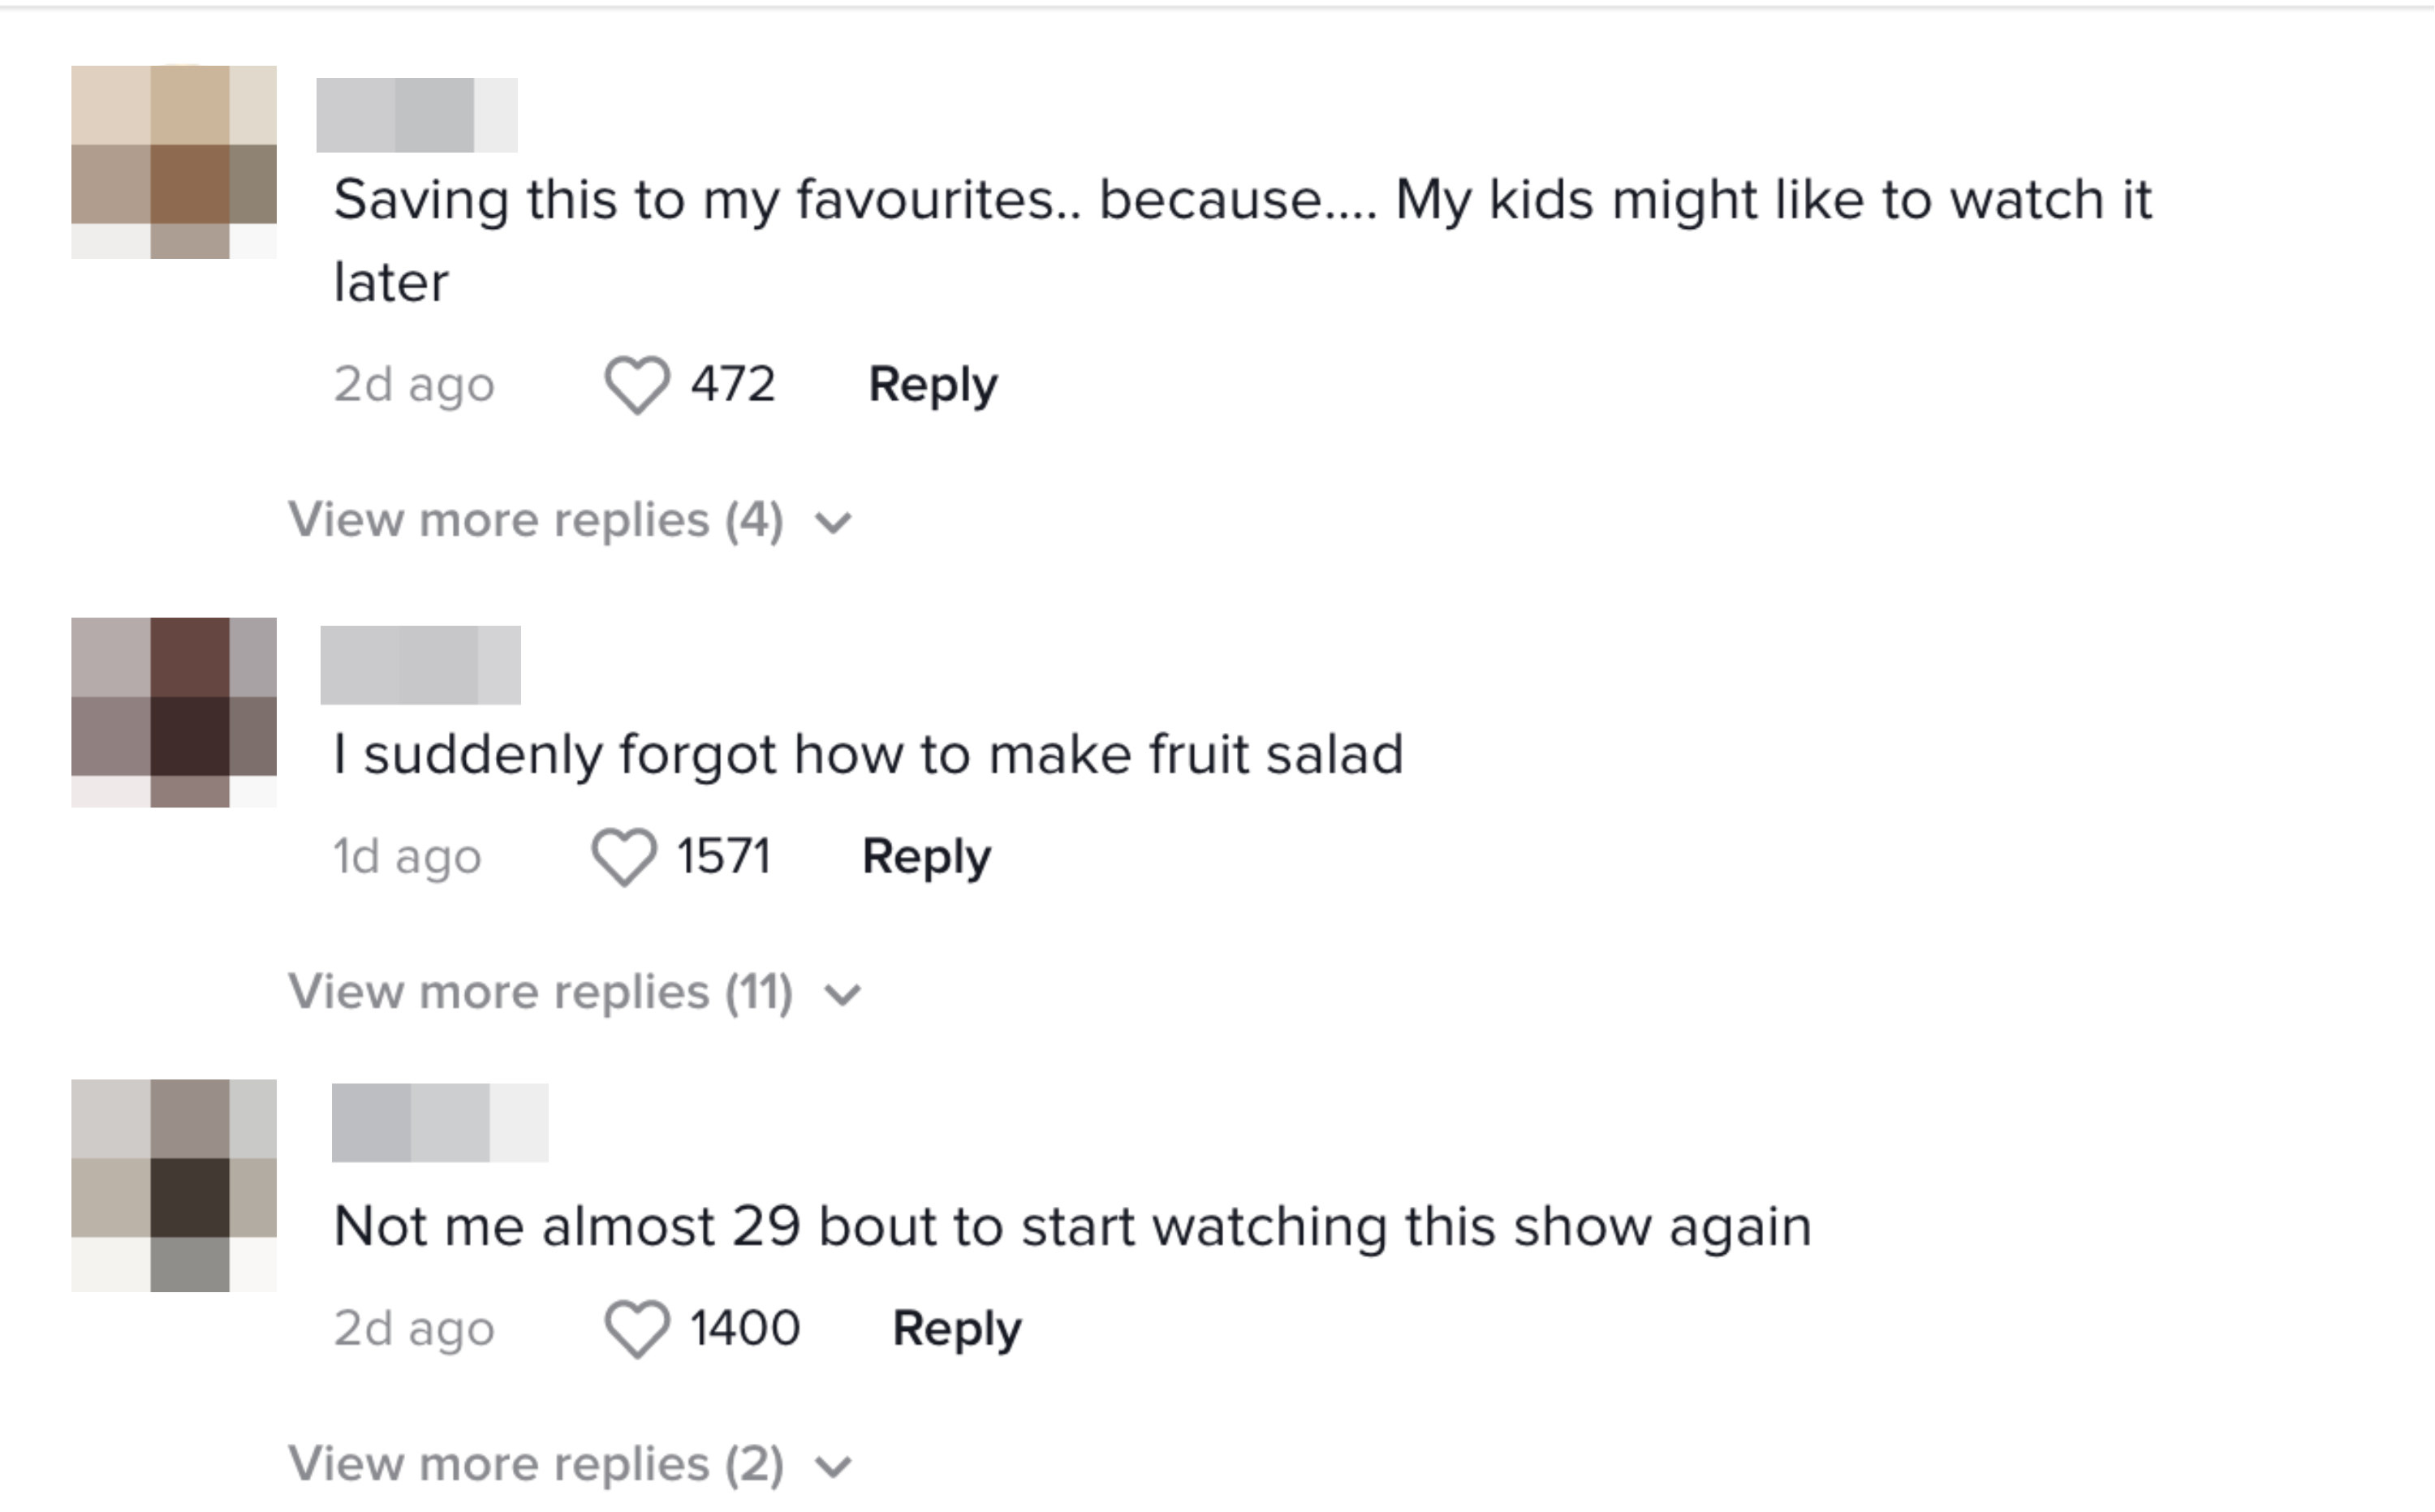 One commenter said, &quot;I suddenly forgot how to make fruit salad&quot; while another said &quot;Not me almost 29 about to start watching this show again&quot;